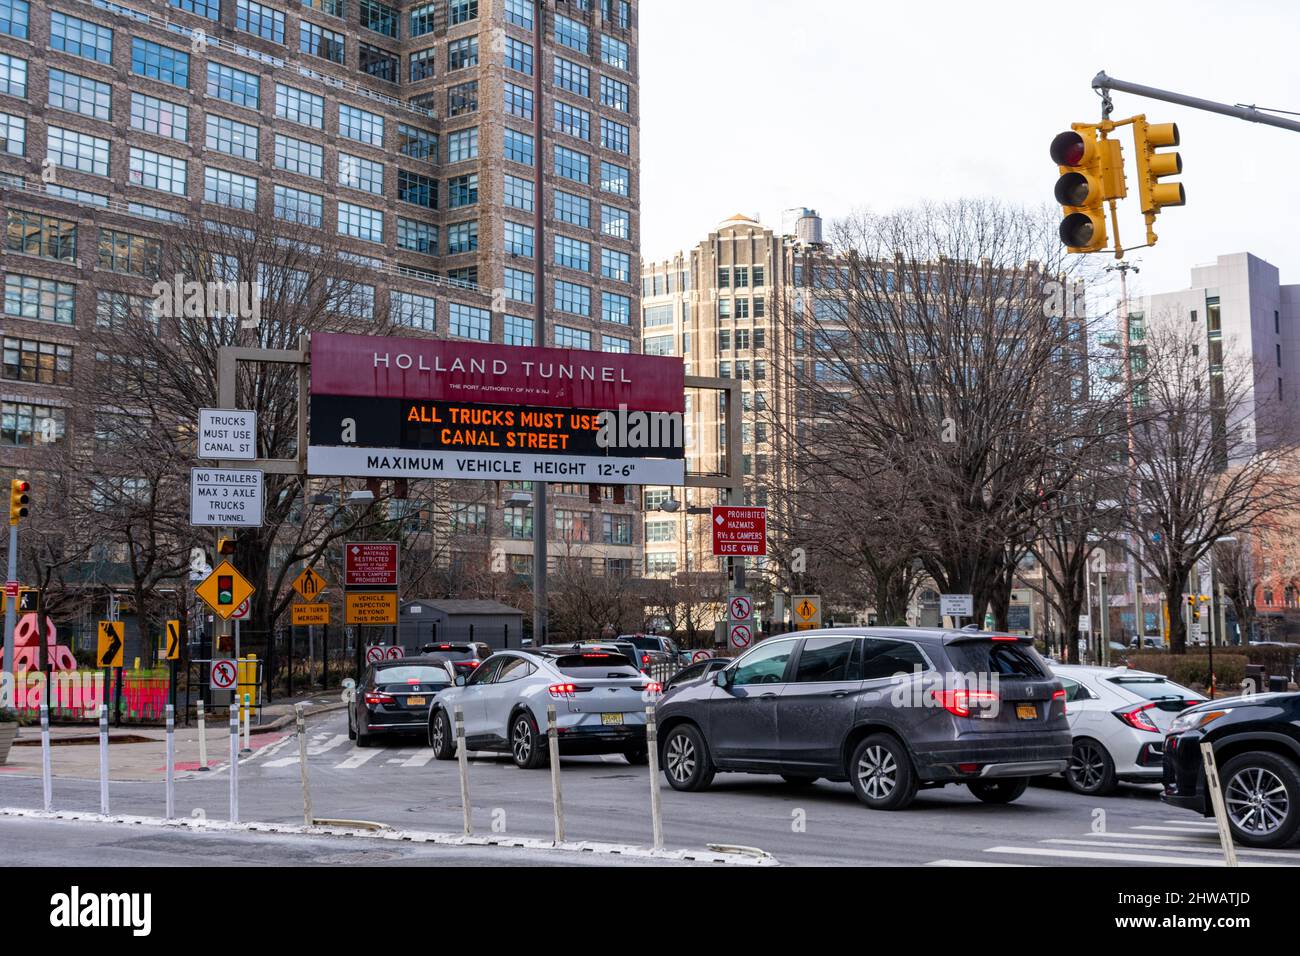 Holland Tunnel entrance in Lower Manhattan - New York, USA, February 2022 Stock Photo